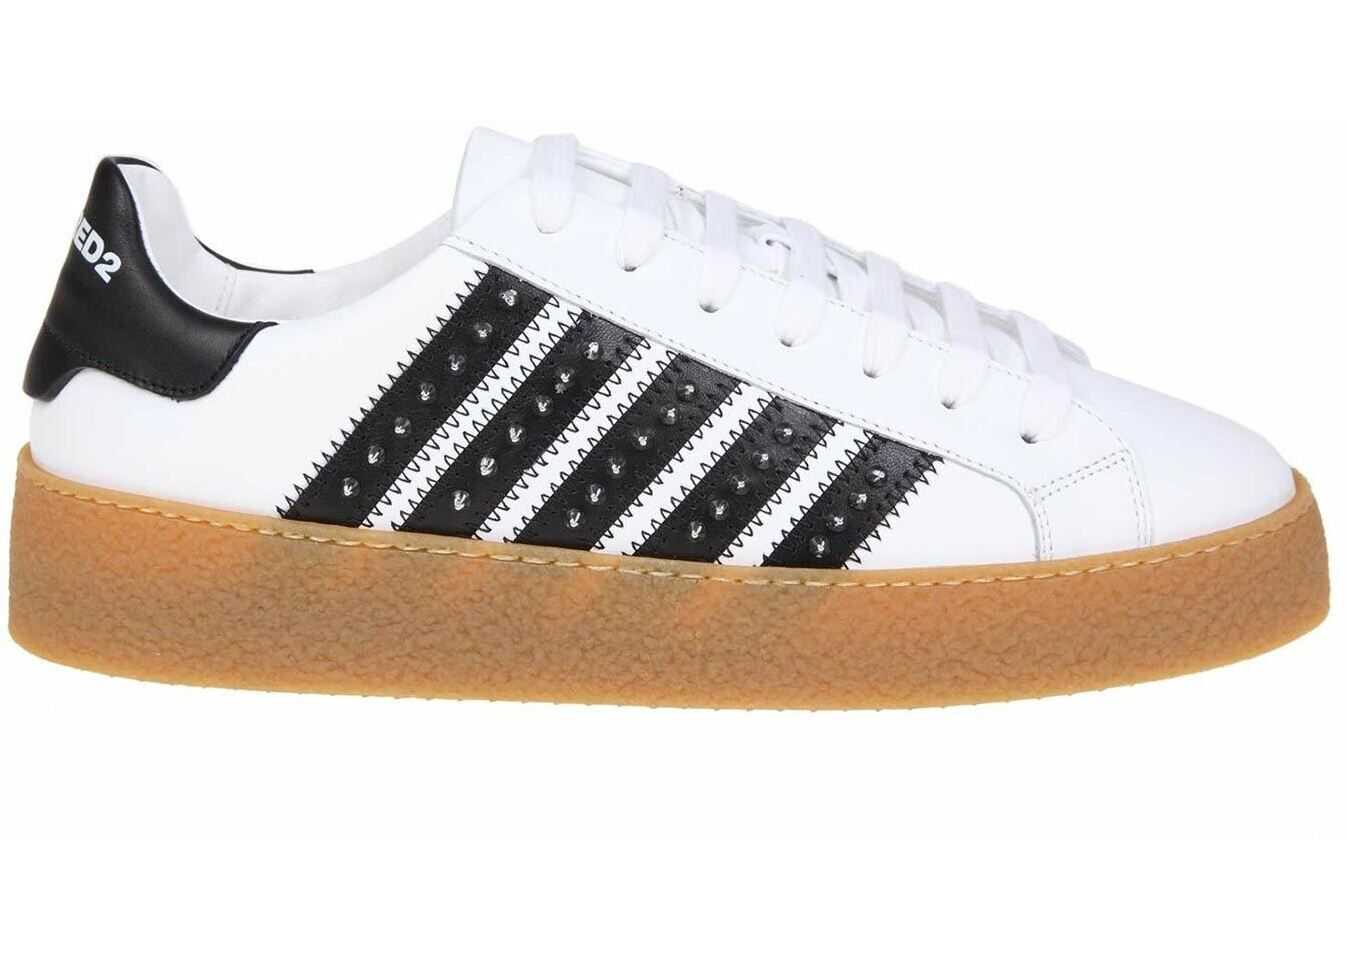 DSQUARED2 Studded White Punk Rapper’s Delight Sneakers White